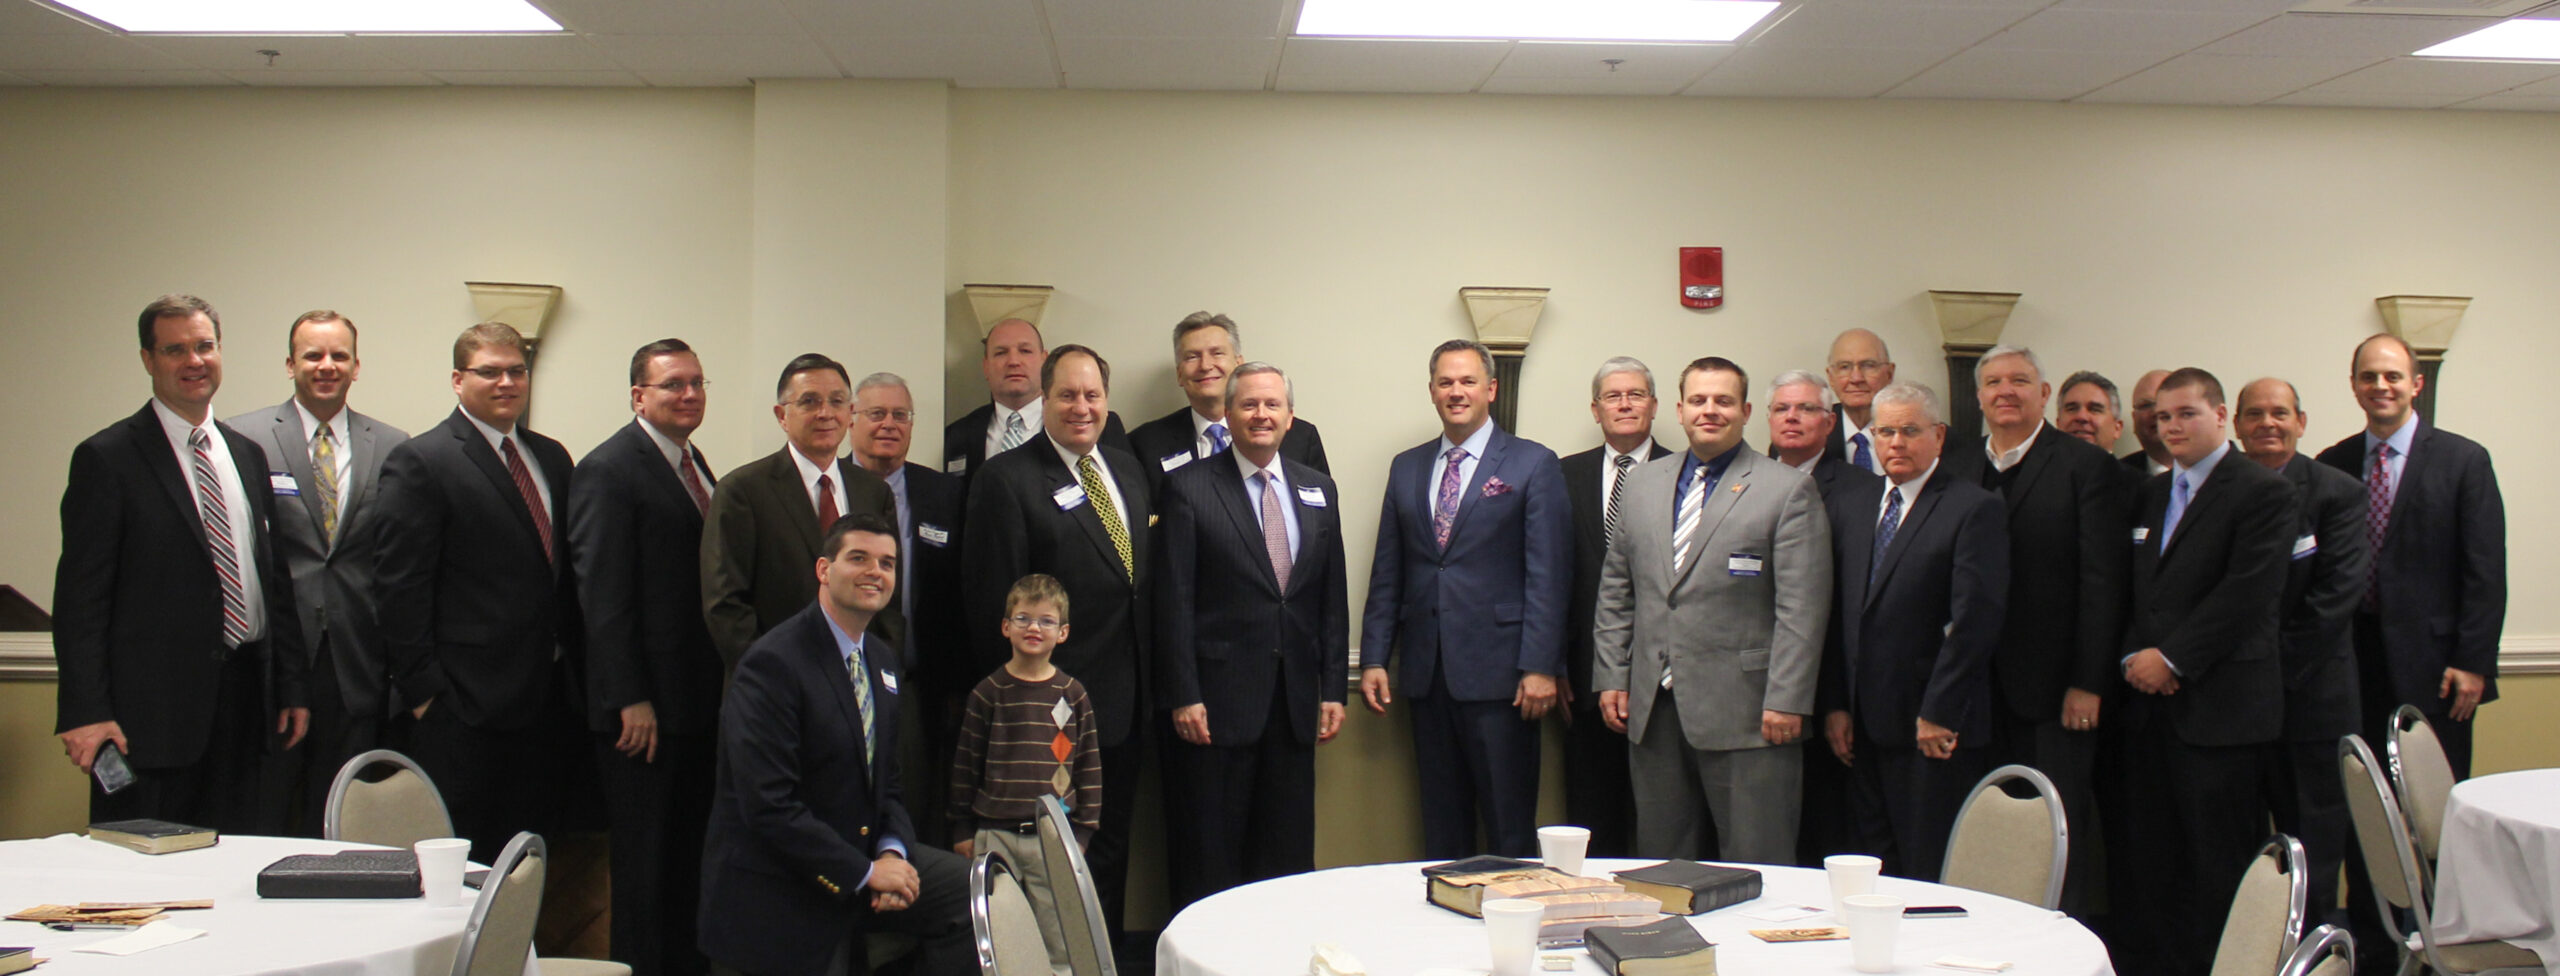 Preachers with Lt. Gov. Dan Forest